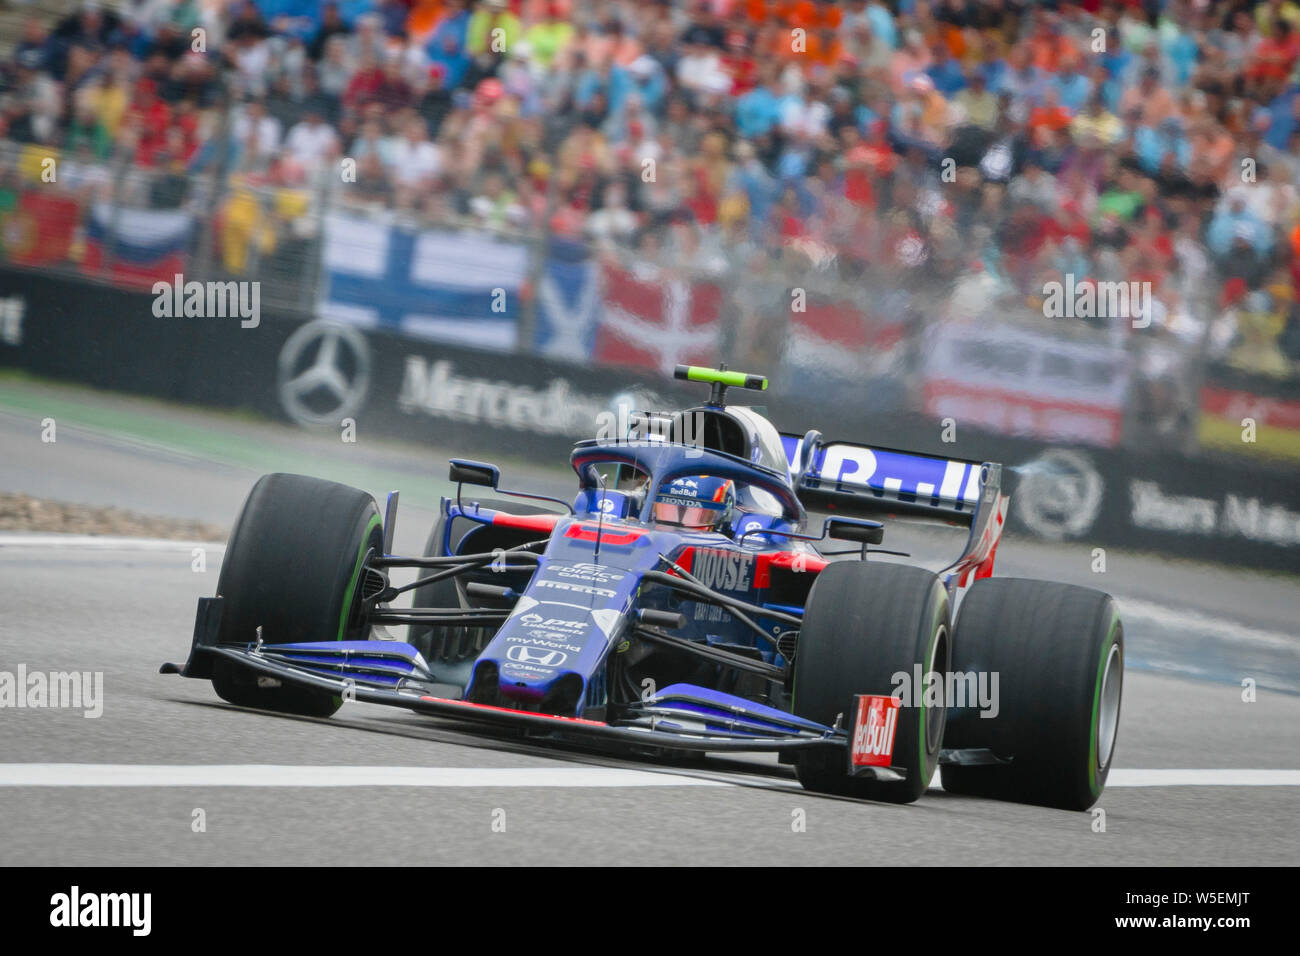 Hockenheim, Germany. 28th July, 2019. Scuderia Toro Rosso's Thai driver Alexander Albon competes during the German F1 Grand Prix race. Credit: SOPA Images Limited/Alamy Live News Stock Photo